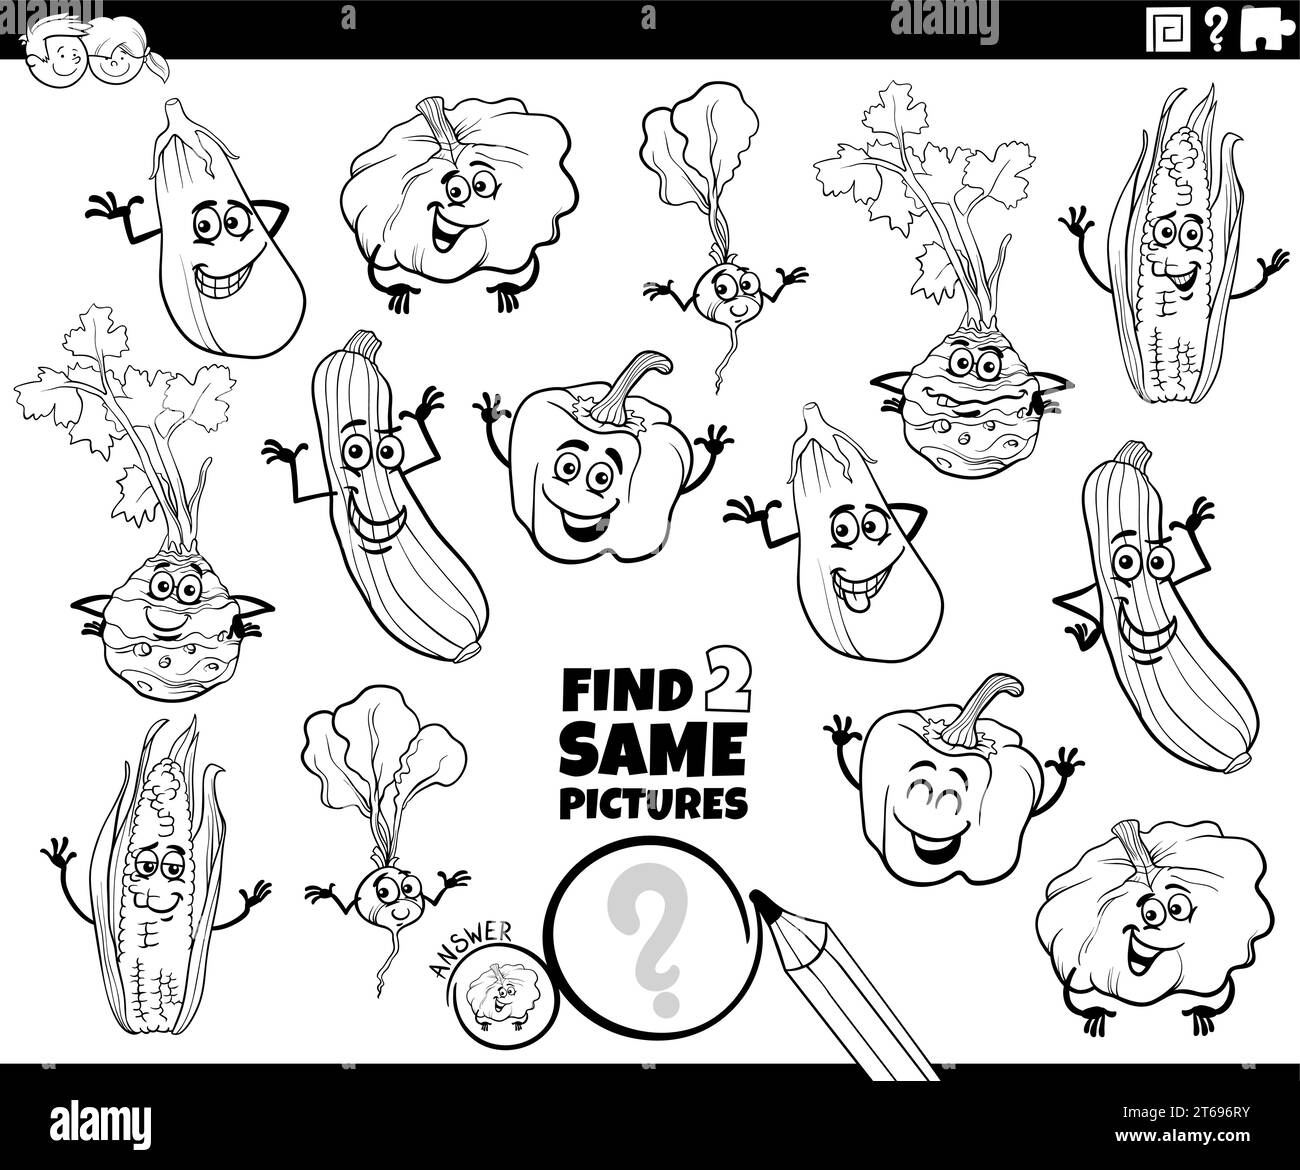 Cartoon illustration of finding two same pictures educational activity with vegetable characters coloring page Stock Vector